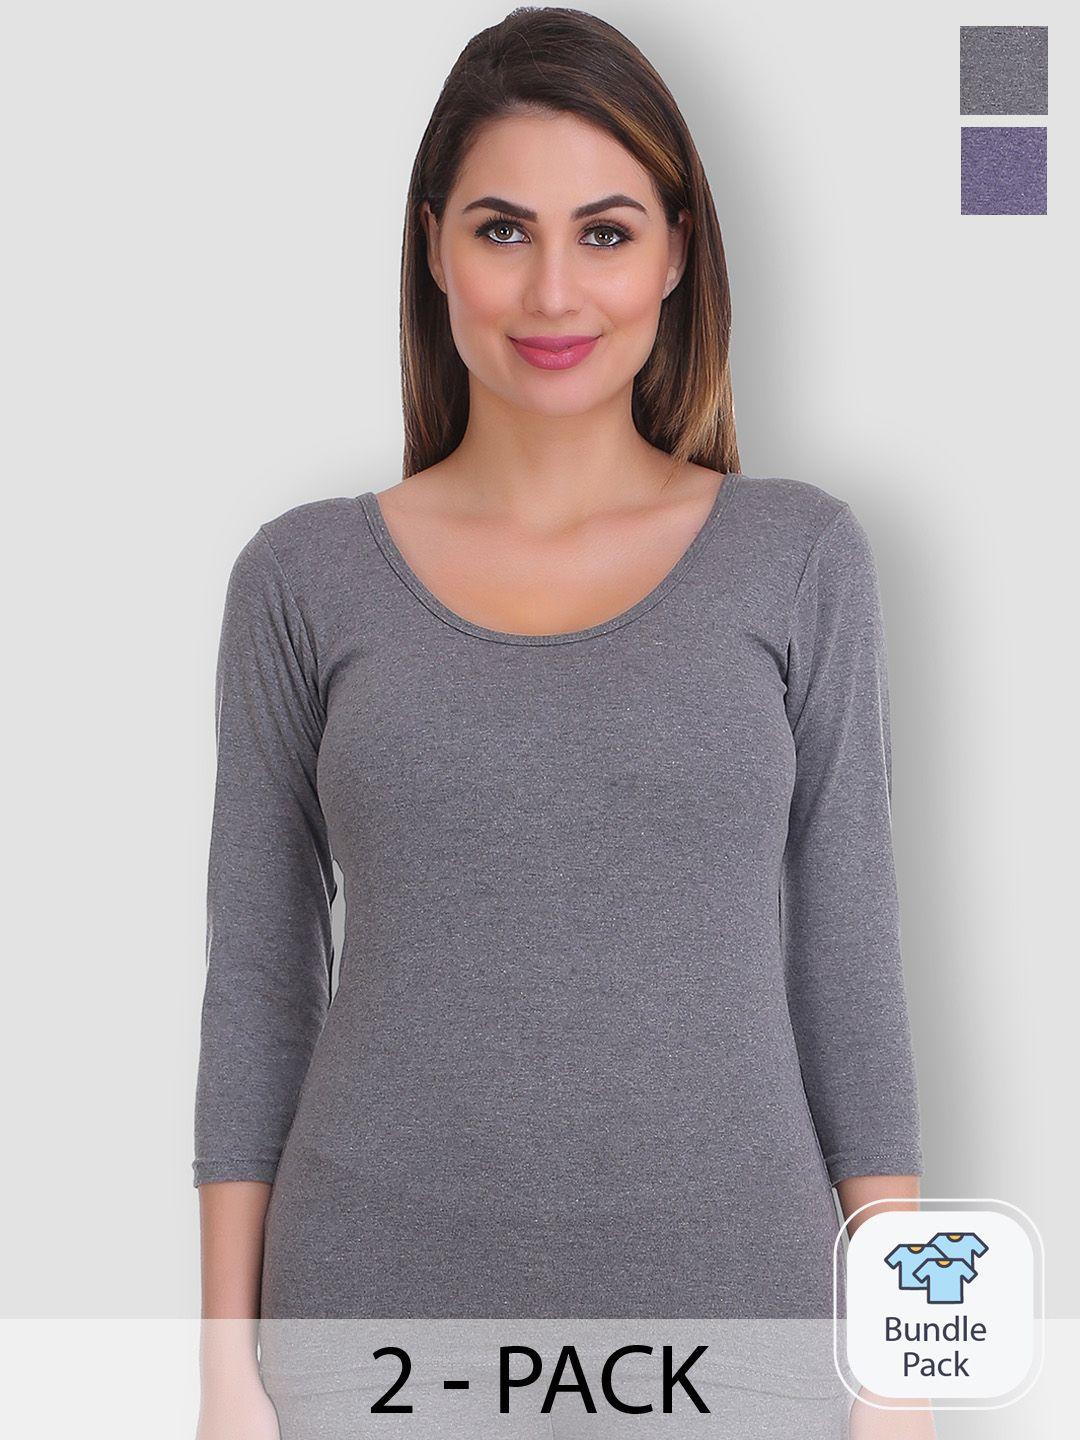 selfcare pack of 2 round neck thermal tops